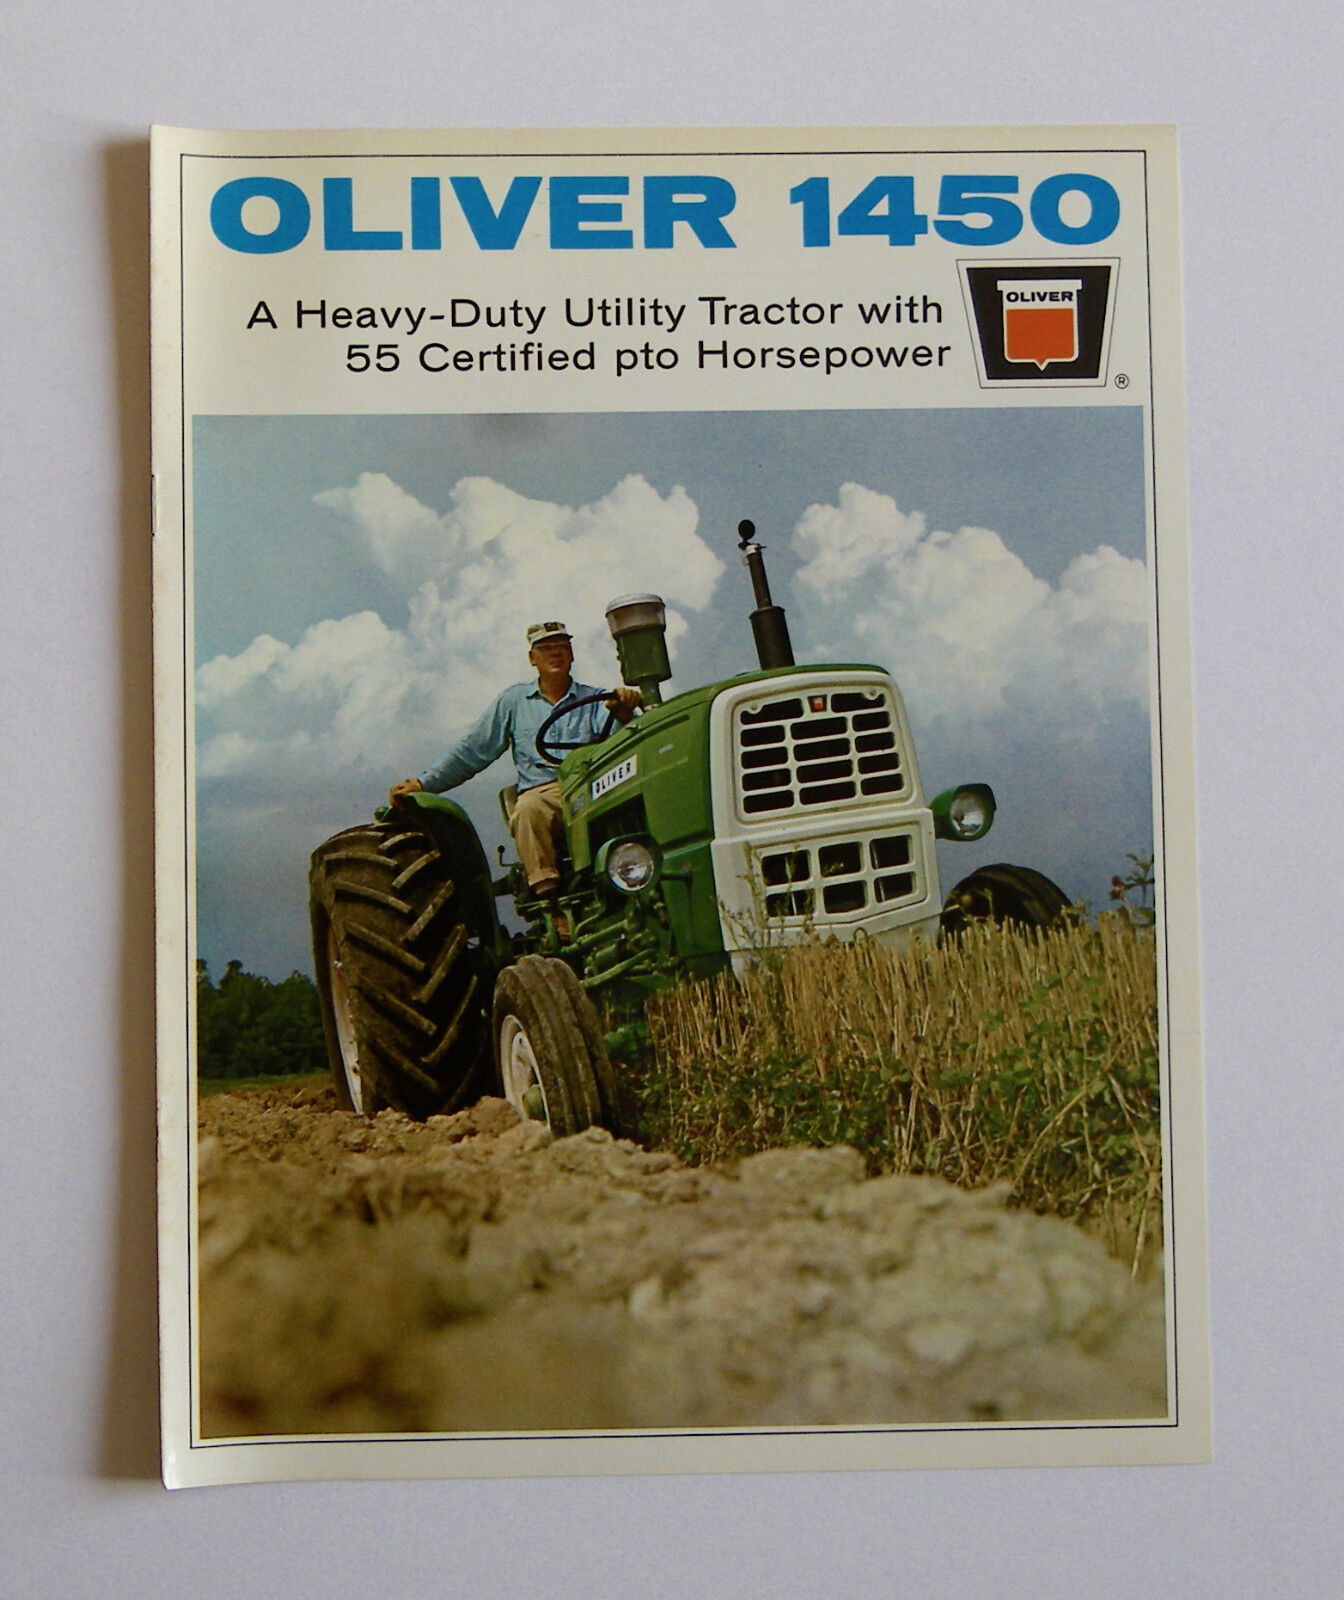 1967 Oliver 1450 Utility Tractor Brochure 4-Wheel Drive